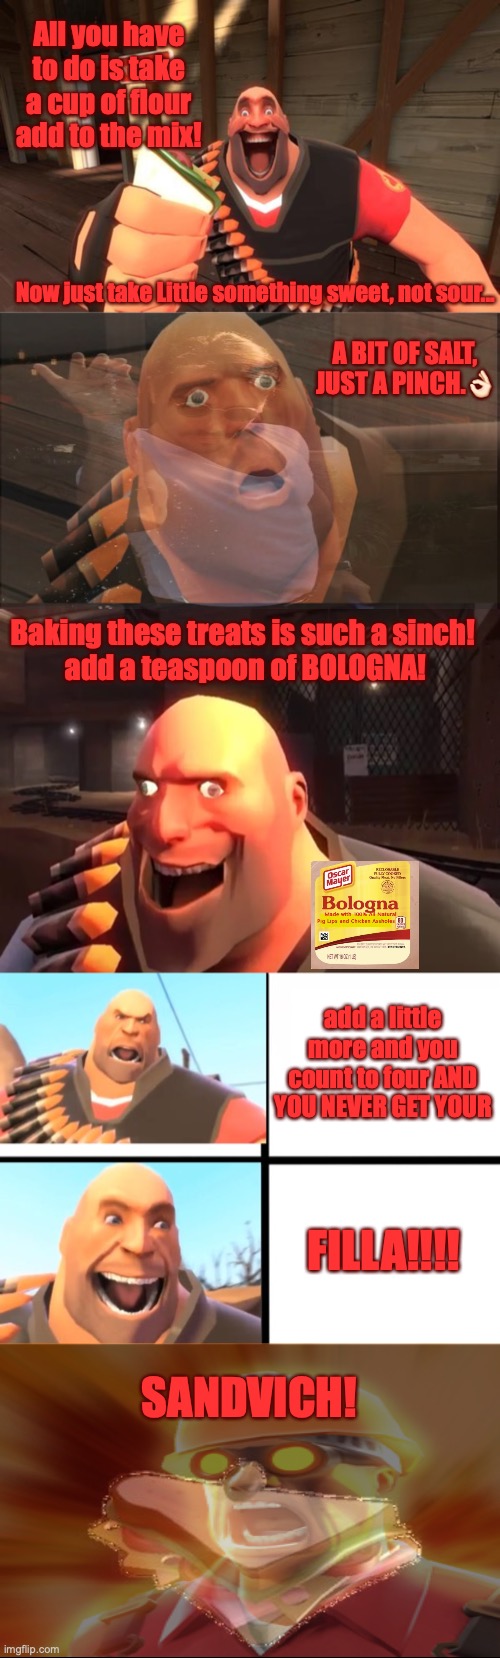 TF2: Engie ask Heavy how to make a sandvich. | All you have to do is take a cup of flour add to the mix! Now just take Little something sweet, not sour... A BIT OF SALT, JUST A PINCH.👌🏻; Baking these treats is such a sinch! 
add a teaspoon of BOLOGNA! add a little more and you count to four AND YOU NEVER GET YOUR; FILLA!!!! SANDVICH! | image tagged in sandvich fixes everything,tf2 heavy,sandvich,song,team fortress 2,gaming | made w/ Imgflip meme maker